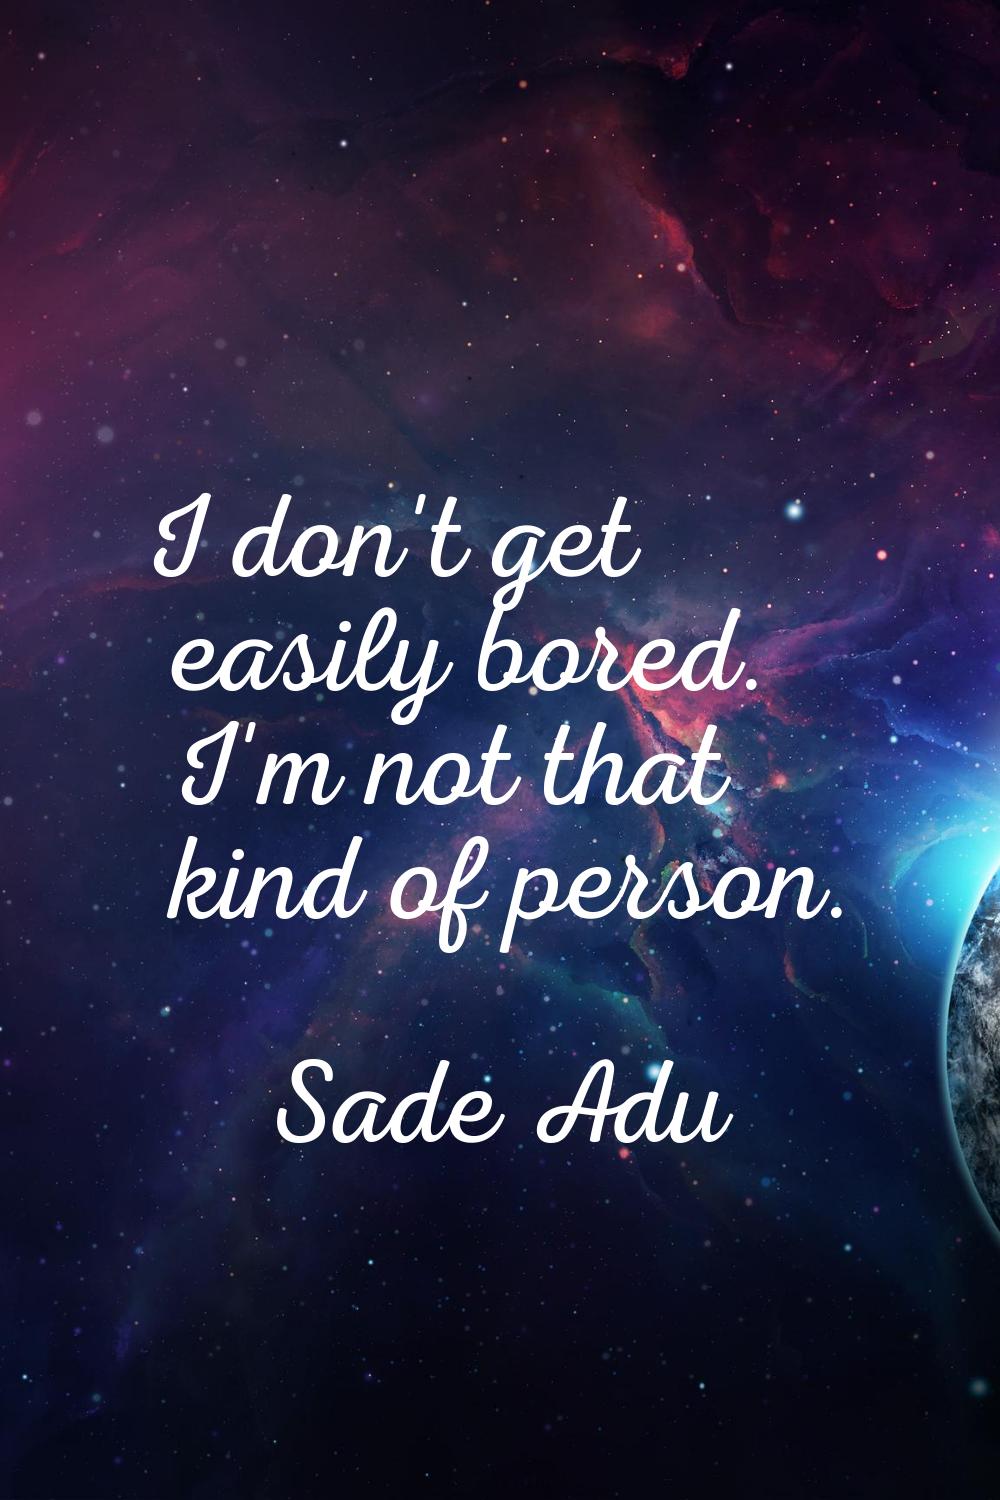 I don't get easily bored. I'm not that kind of person.